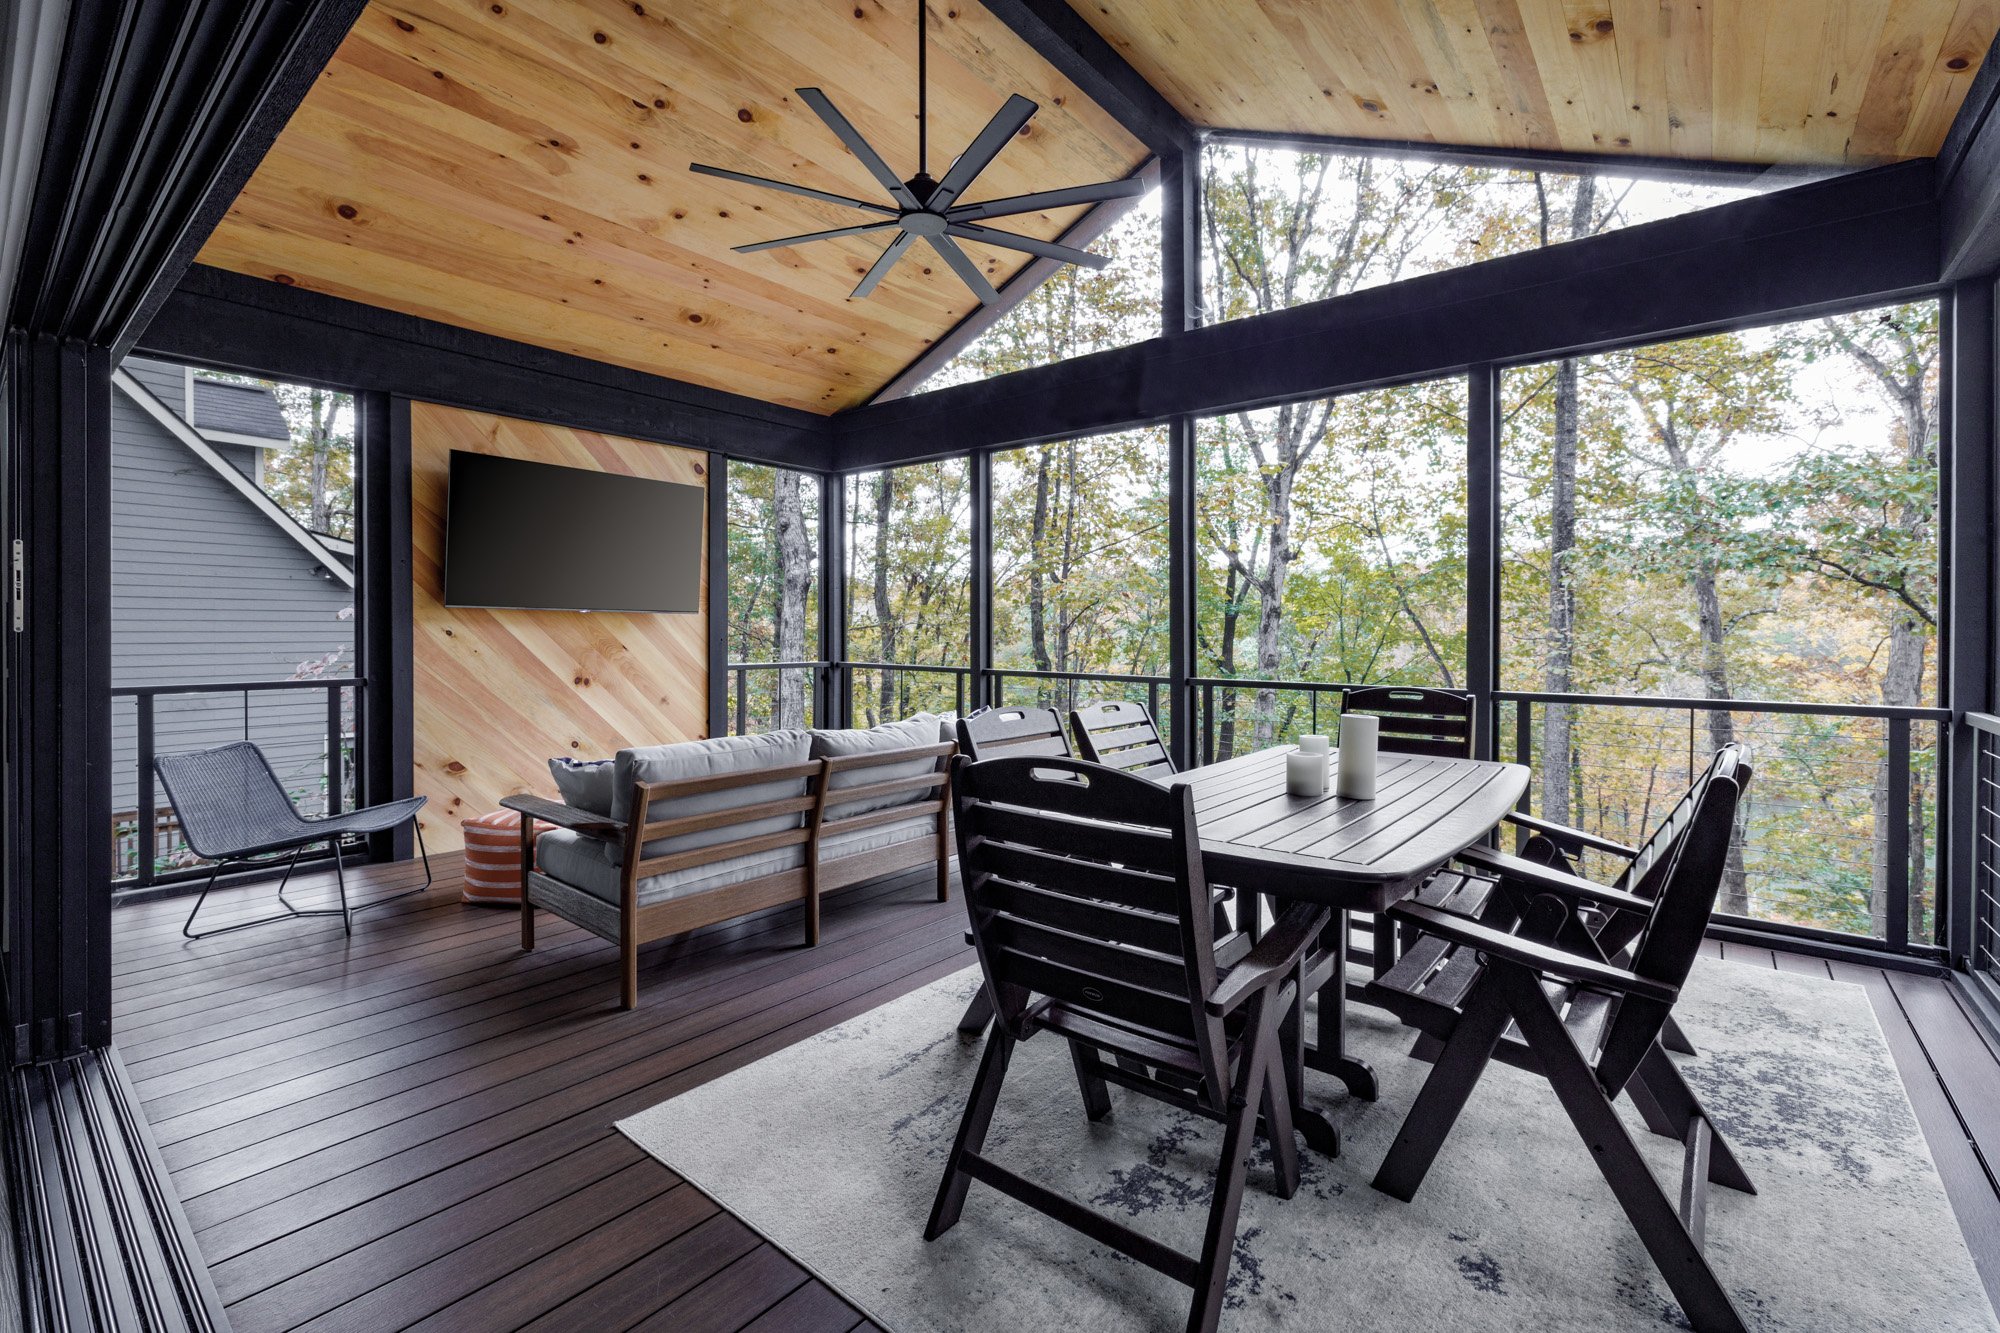 Modern enclosed porch with dining set, pine ceiling, and forest views through floor-to-ceiling windows.